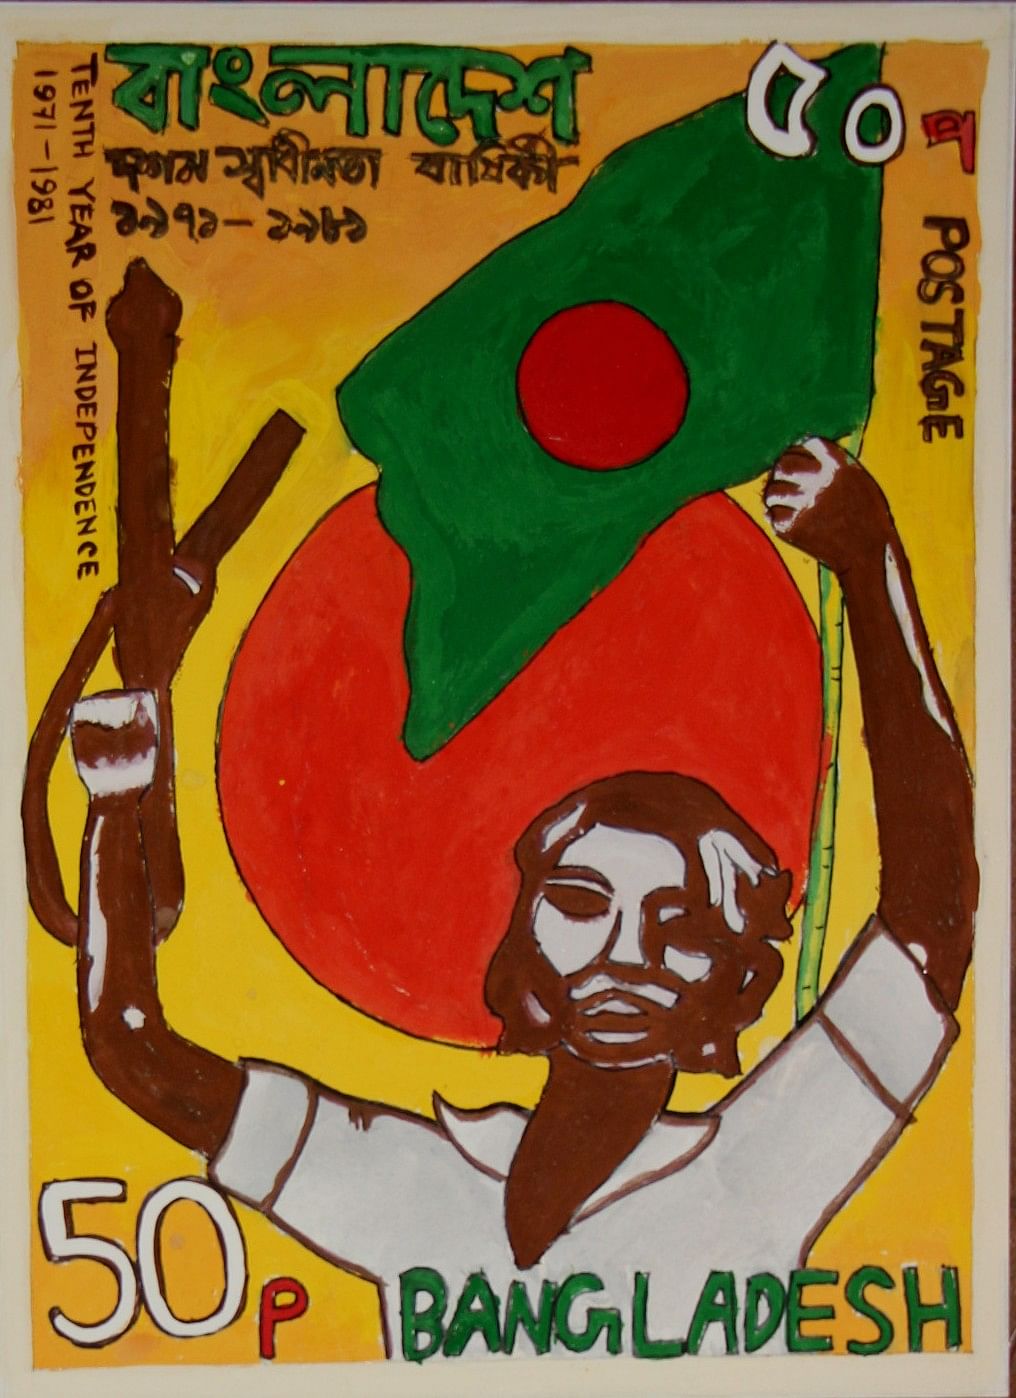 Celebration of a freedom fighter has been painted in an artwork as per a stamp. Photo: Prothom Alo